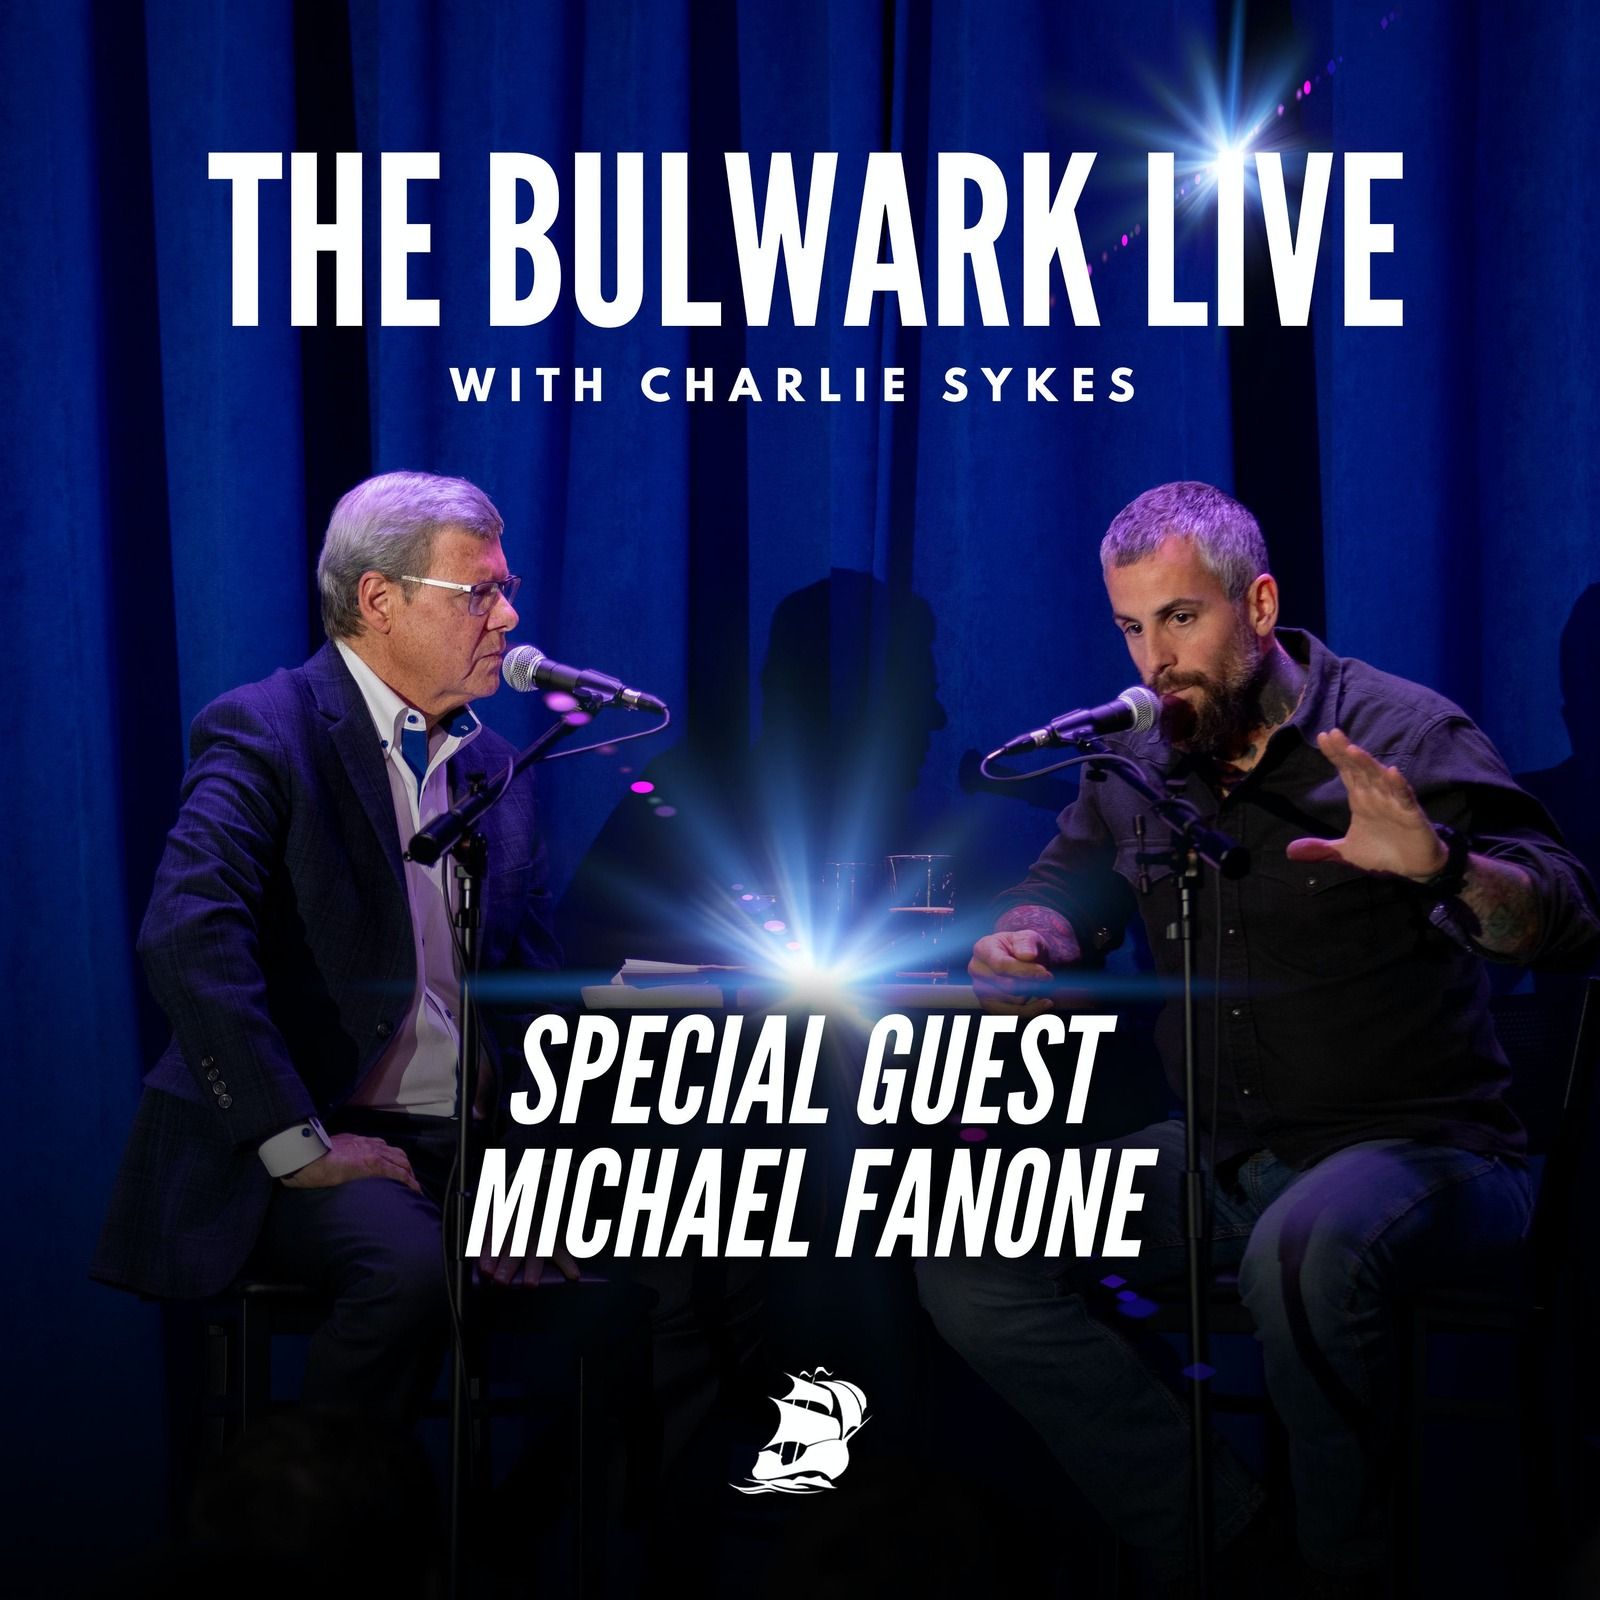 The Bulwark Live, with Michael Fanone by The Bulwark Podcast